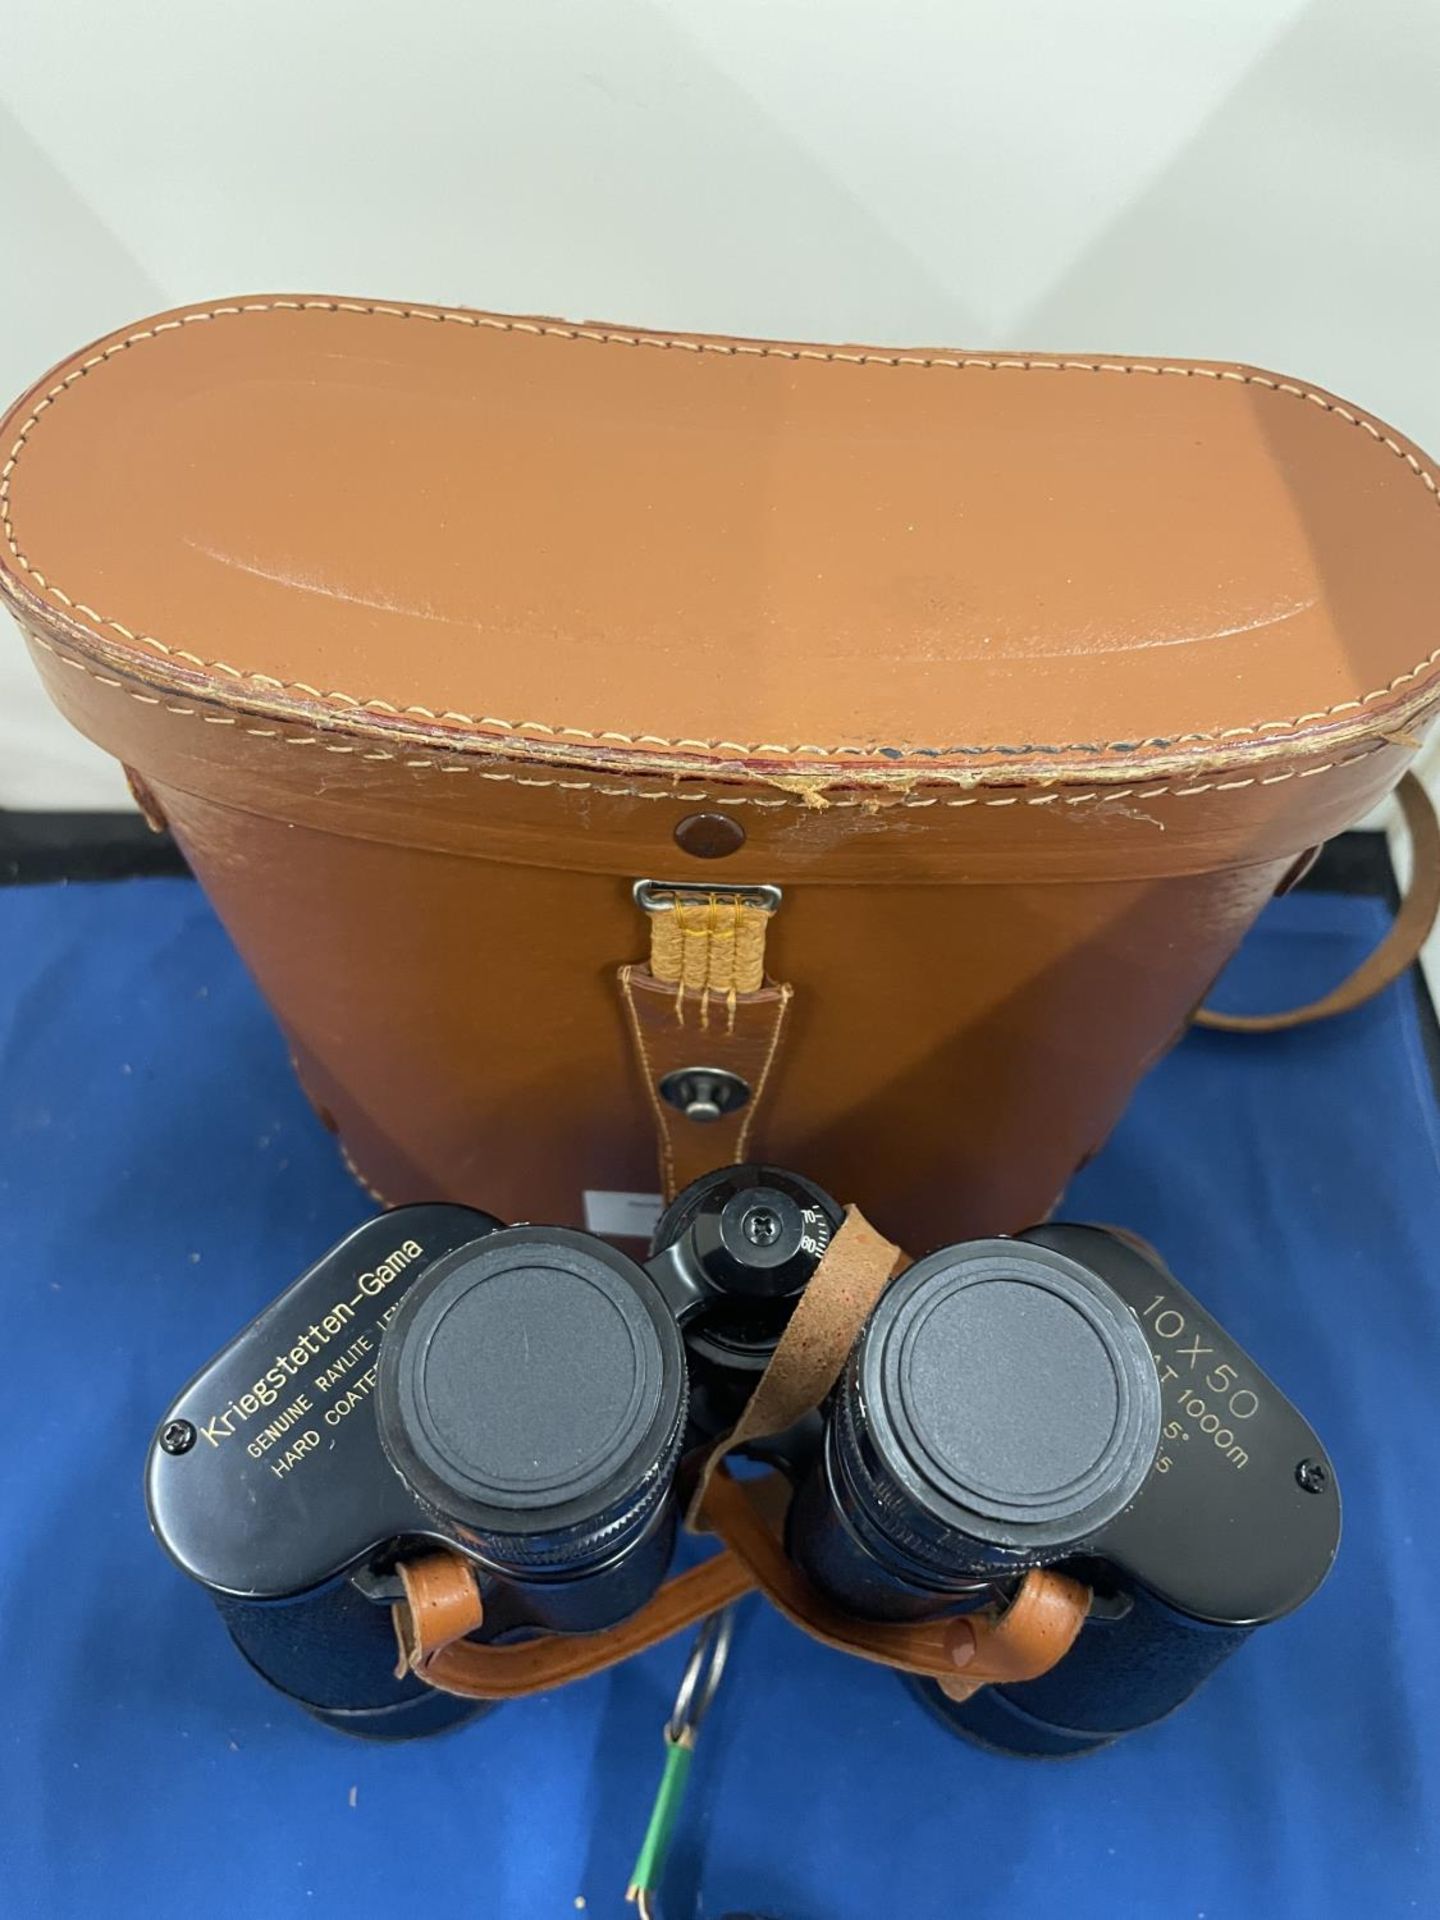 A PAIR OF KRIEGSTETTEN - GAMA BINOCULARS IN A LEATHER CASE WITH A VINTAGE LEATHER TAPE MEASURE - Bild 4 aus 8